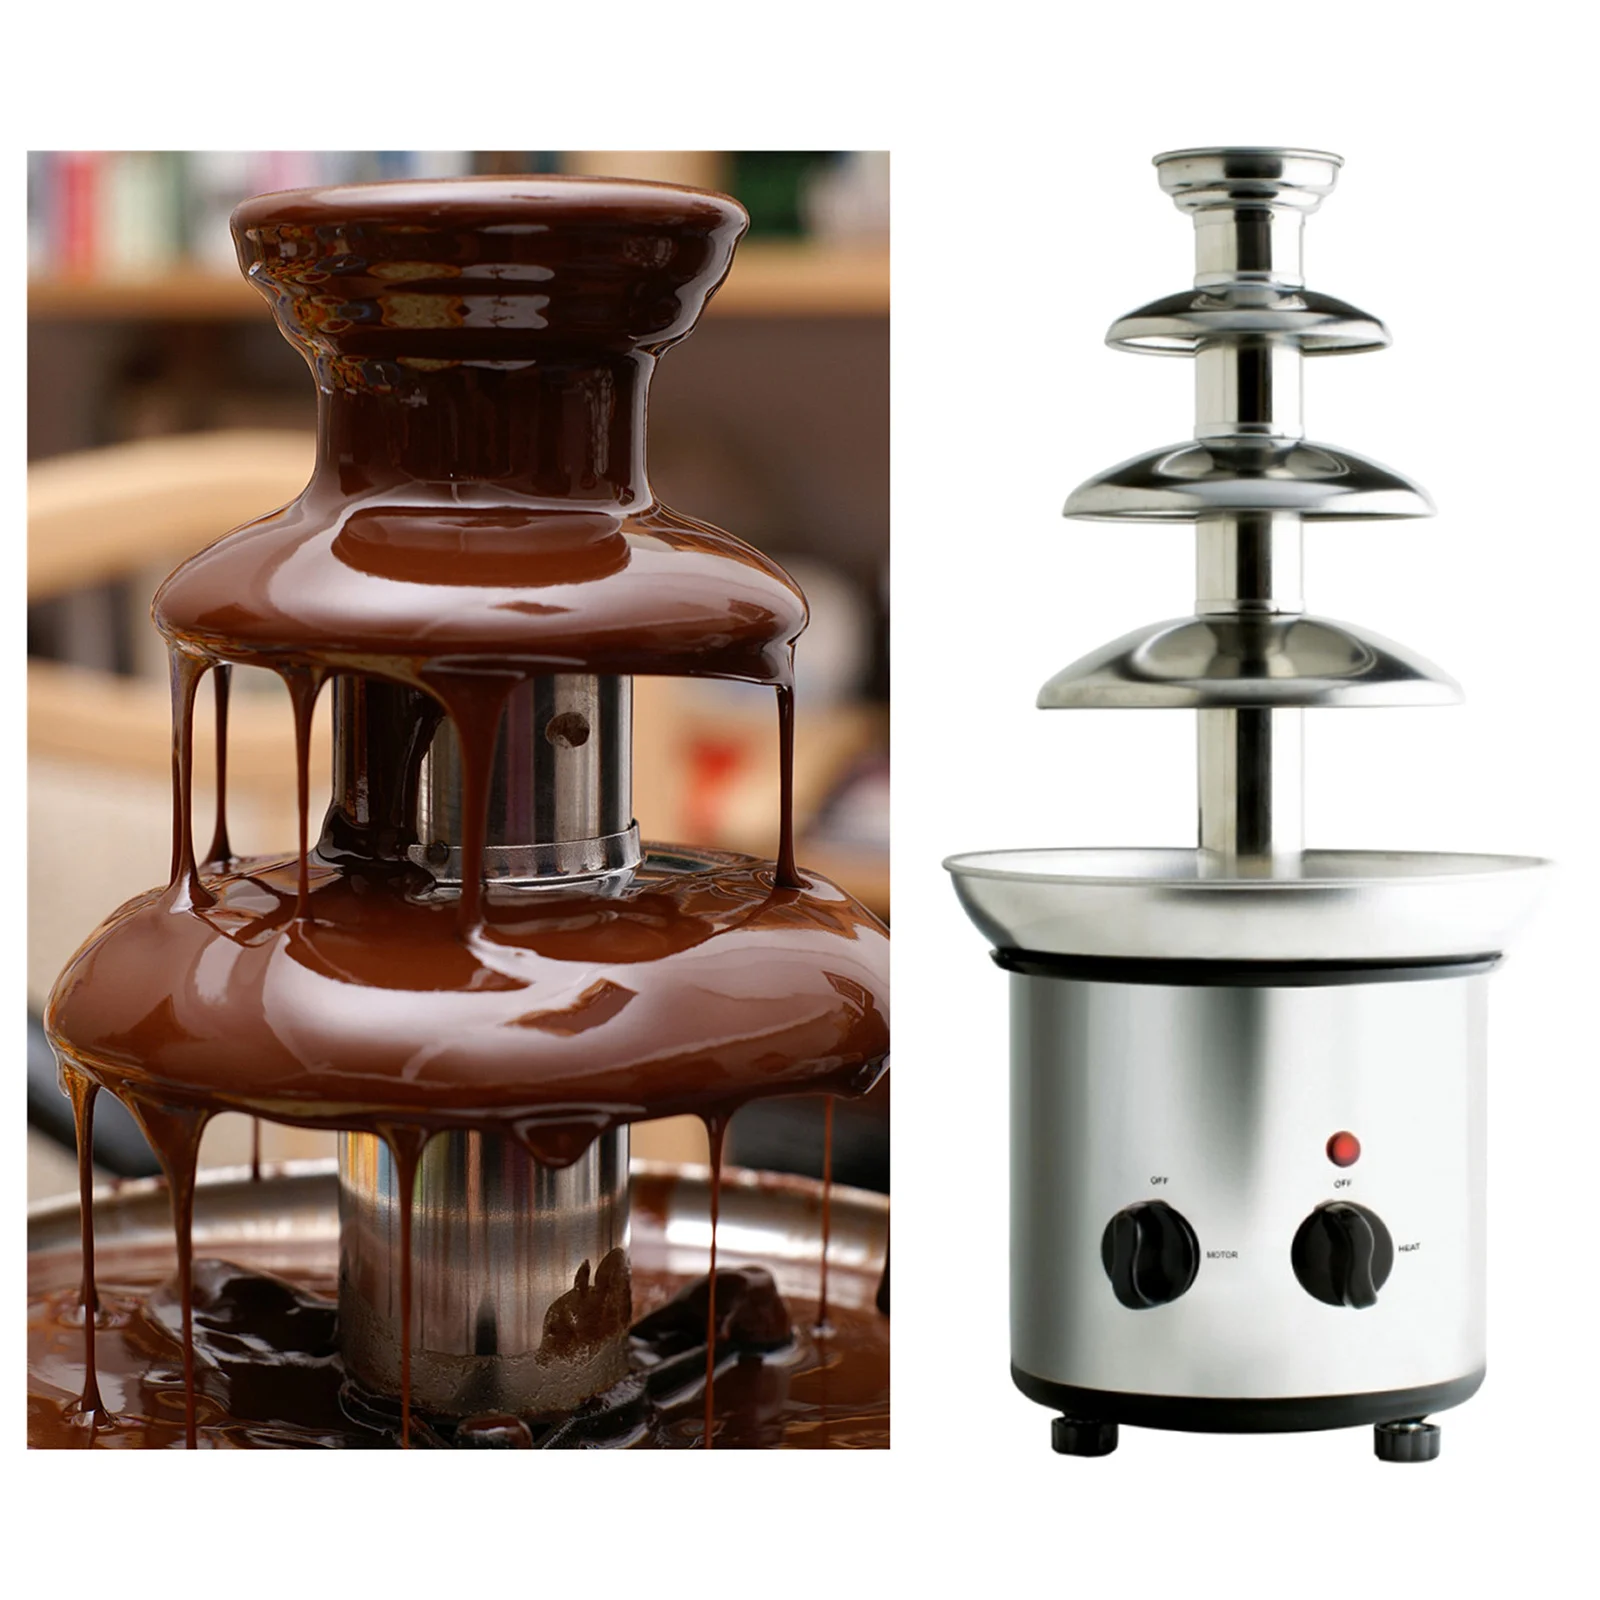 Ranch 2-Pound Capacity Liqueurs Easy to Assemble HEMOTON 4 Tiers Chocolate Fountain Stainless Steel Chocolate Fondue Fountain BBQ Sauce Perfect for Nacho Cheese 